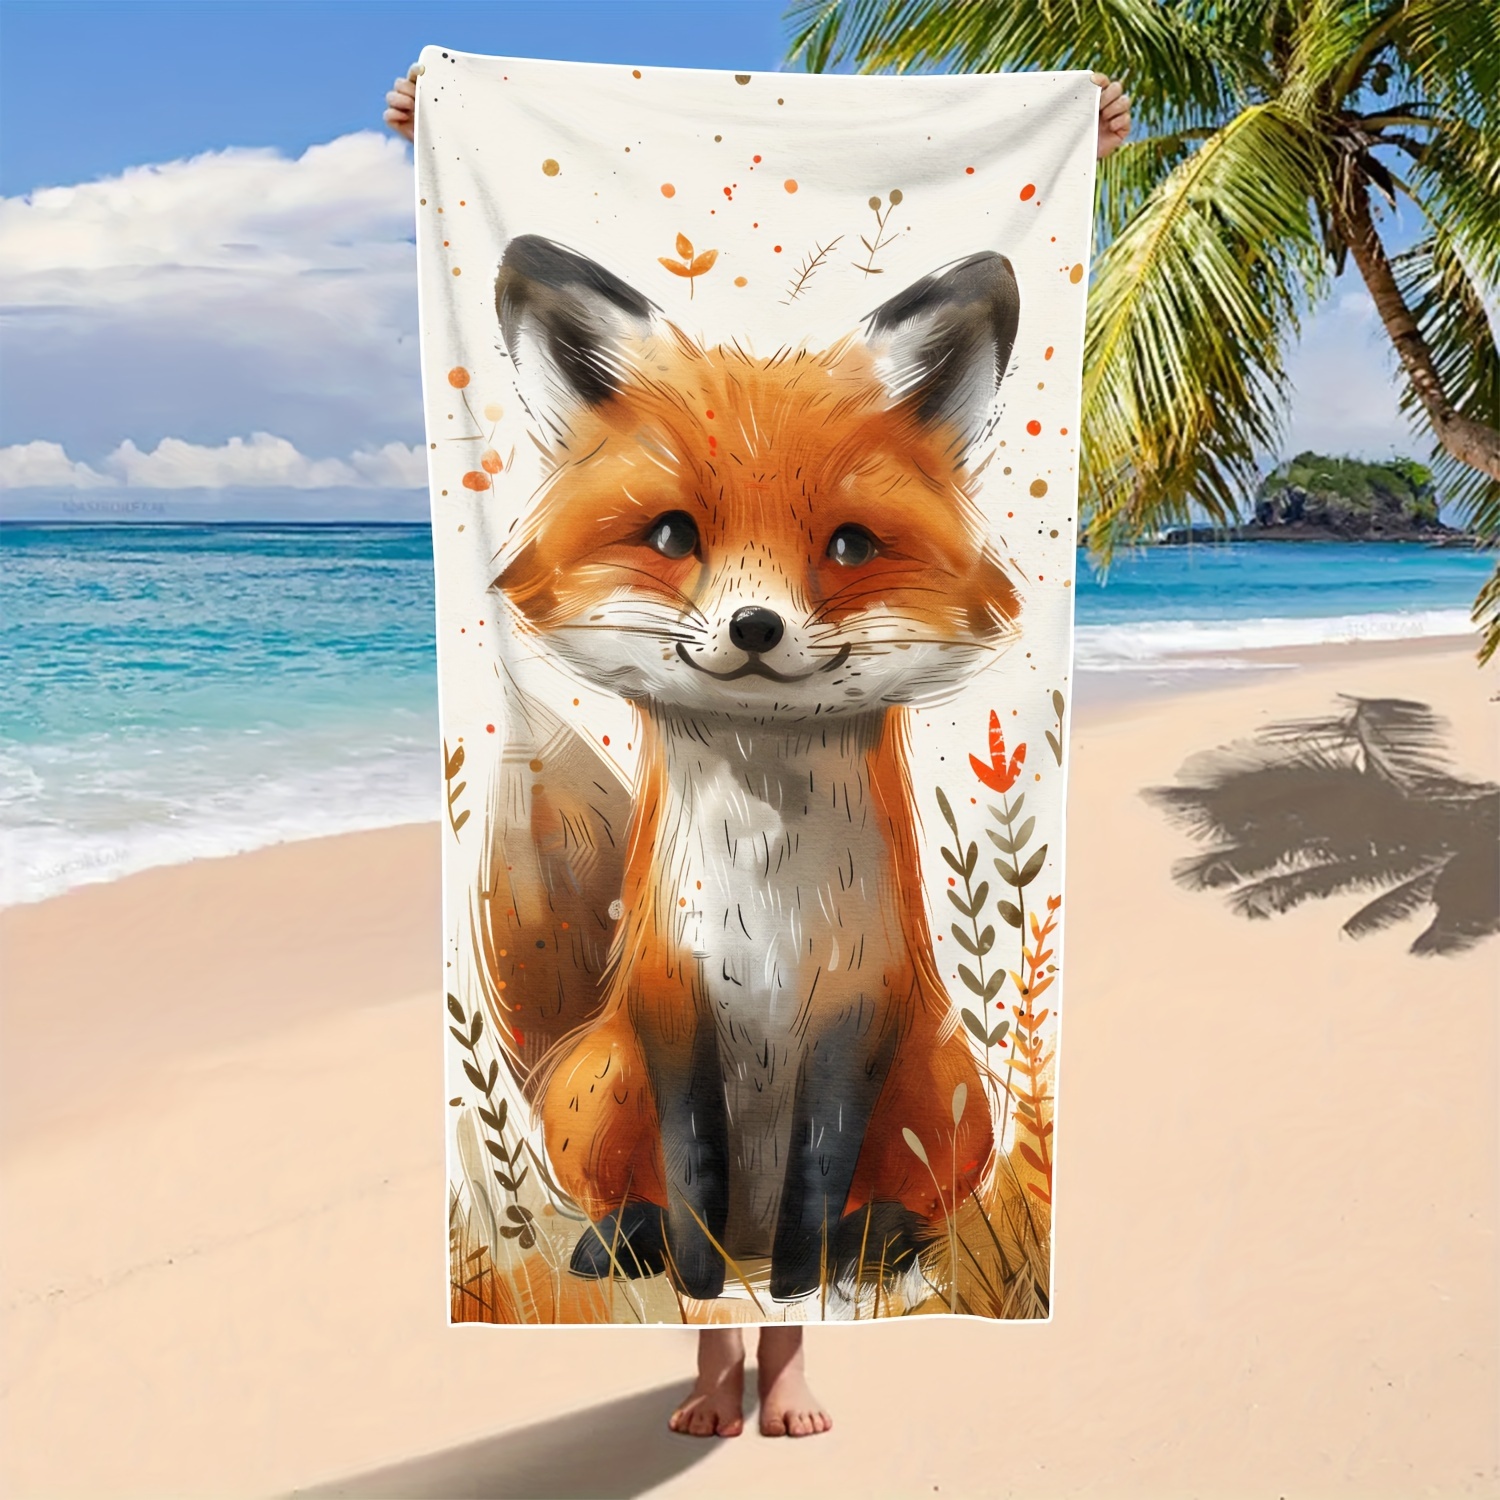 

1pc Stylish Fox Cartoon Microfiber Beach Towel, Quick-drying Absorbent, Lightweight & Soft Large Beach Blanket For Swimming, Travel, Yoga, Outdoor Vacation Essentials - Machine Washable